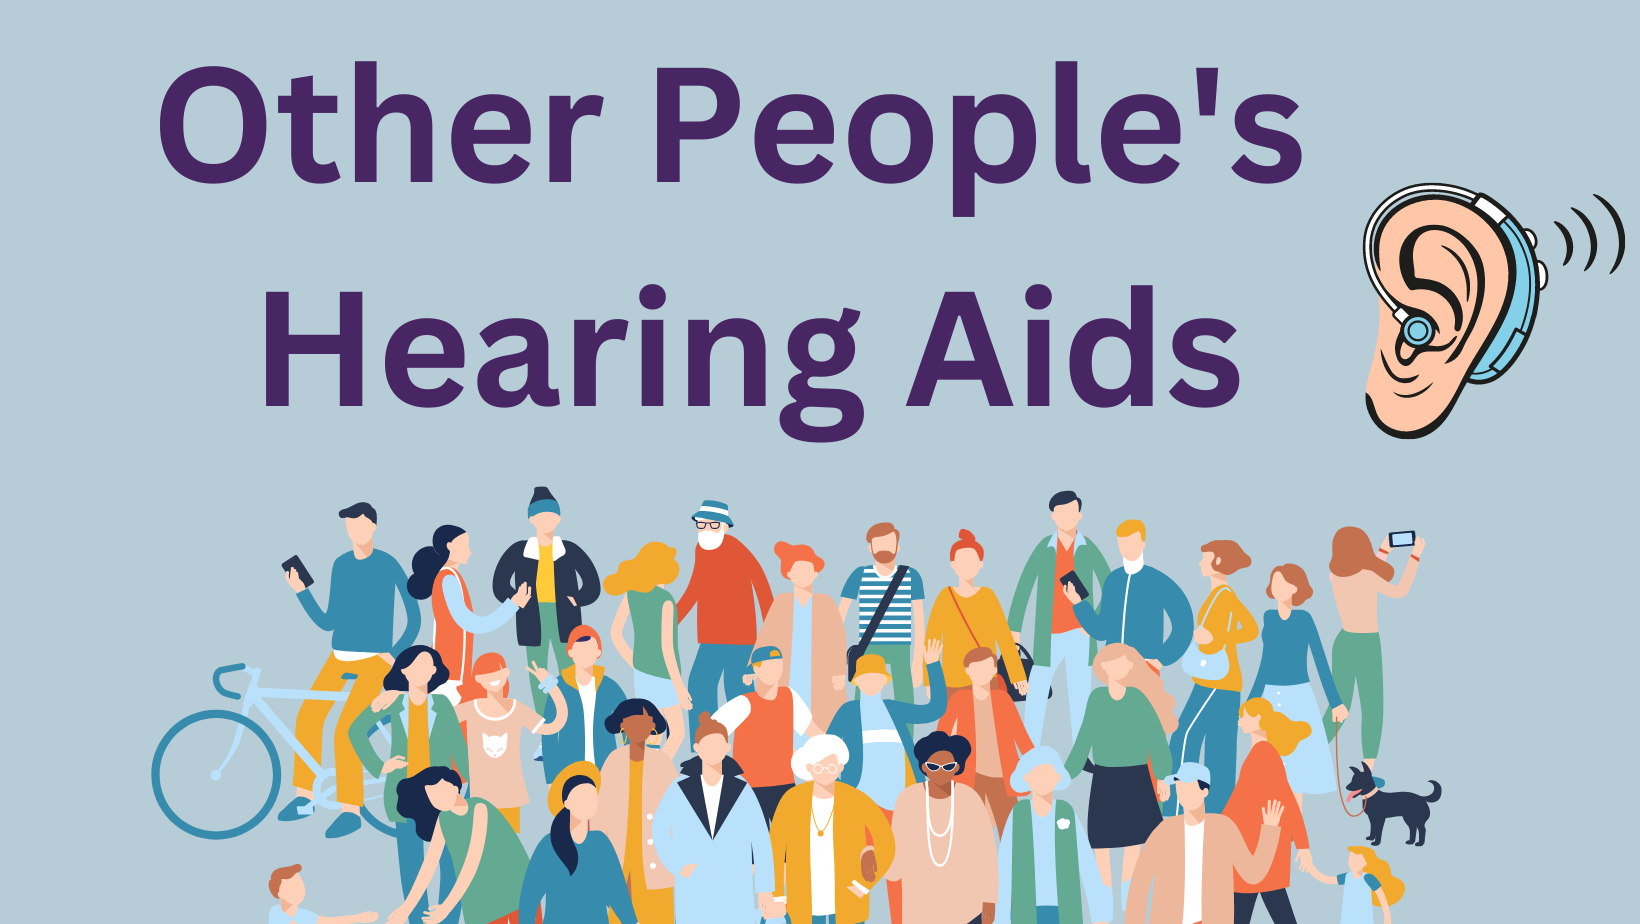 Featured image for “Other People’s Hearing Aids”